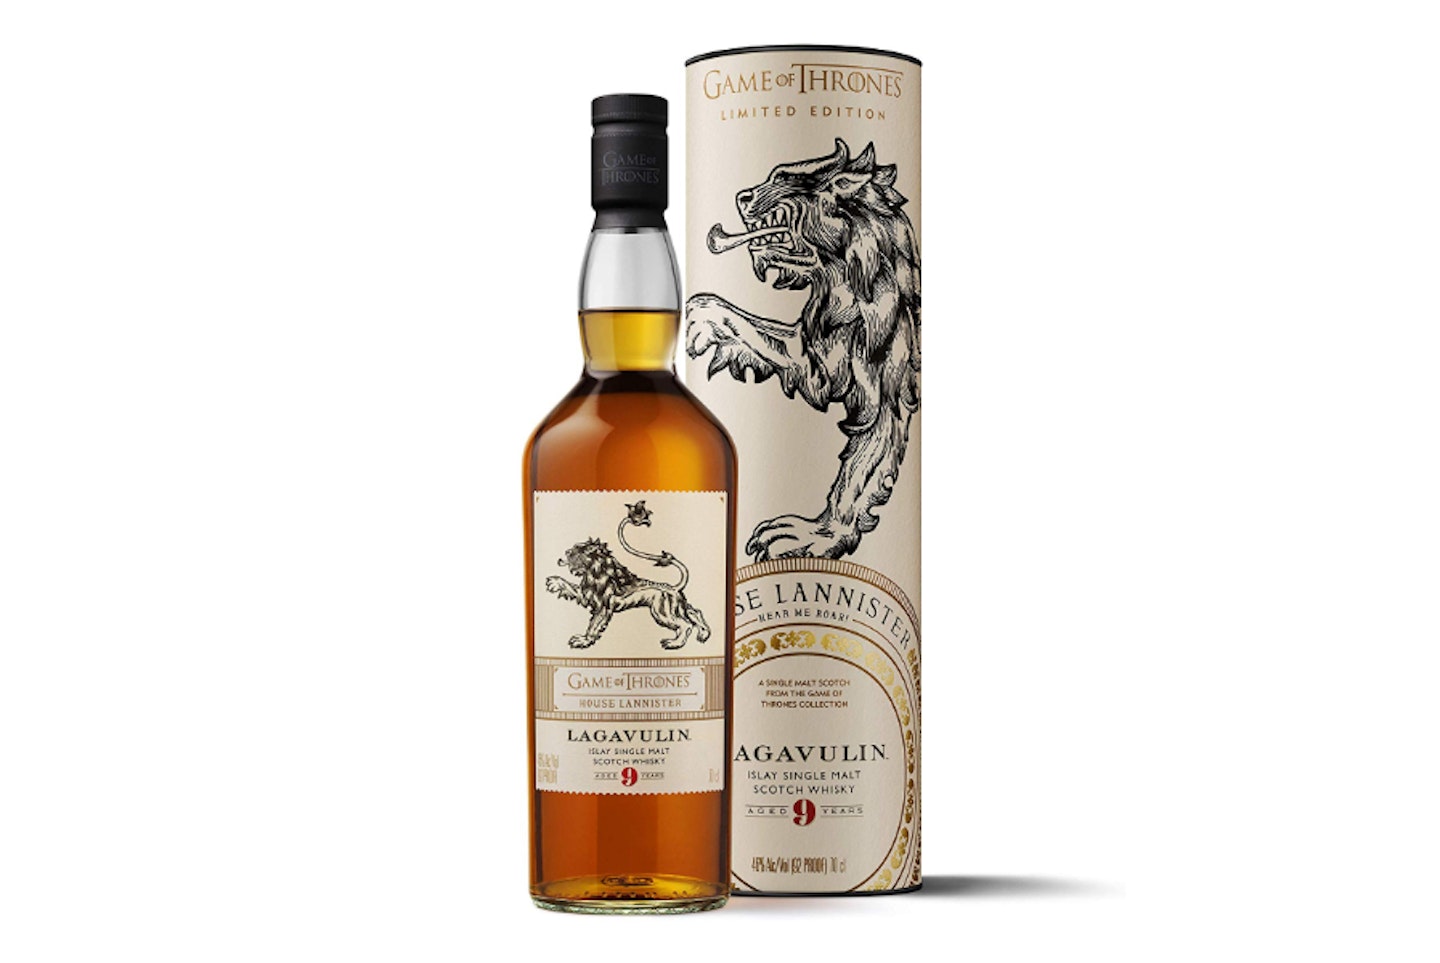 Game of Thrones House Lannister – Lagavulin 9-Year-Old, 700cl, 46%, £67.75